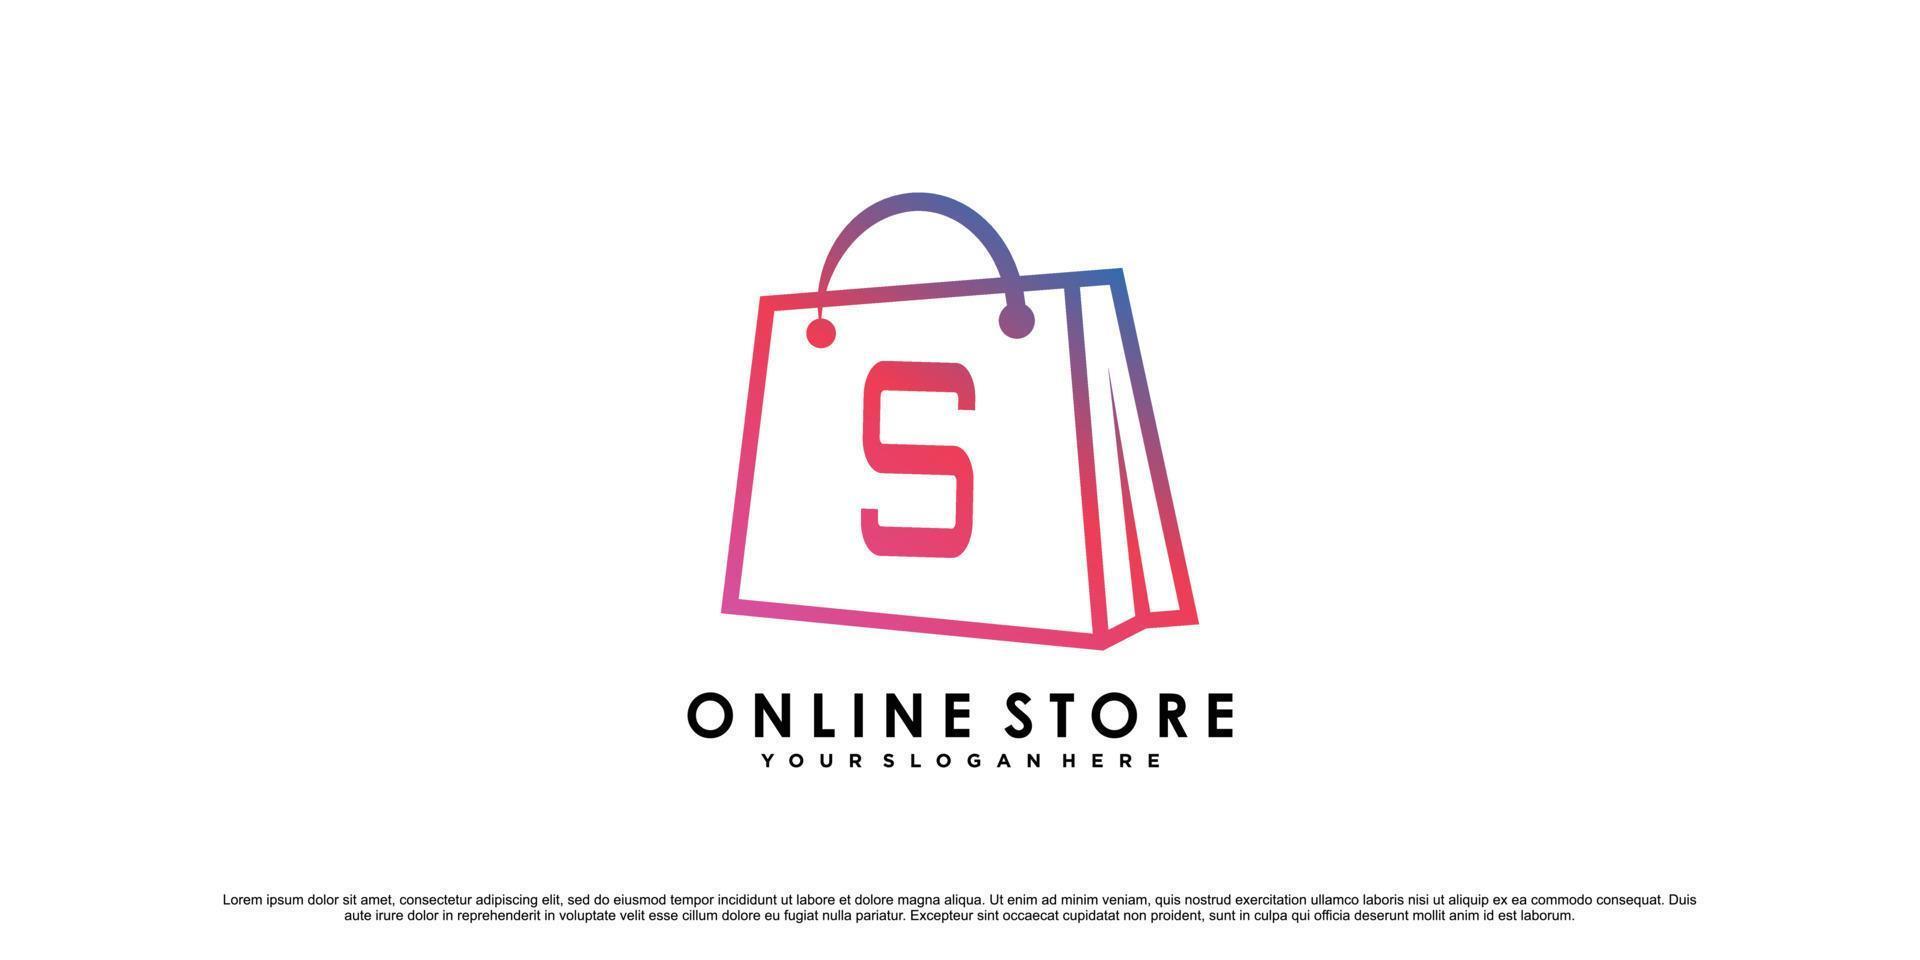 Online store logo design for commerce business icon with modern style concept Premium Vector